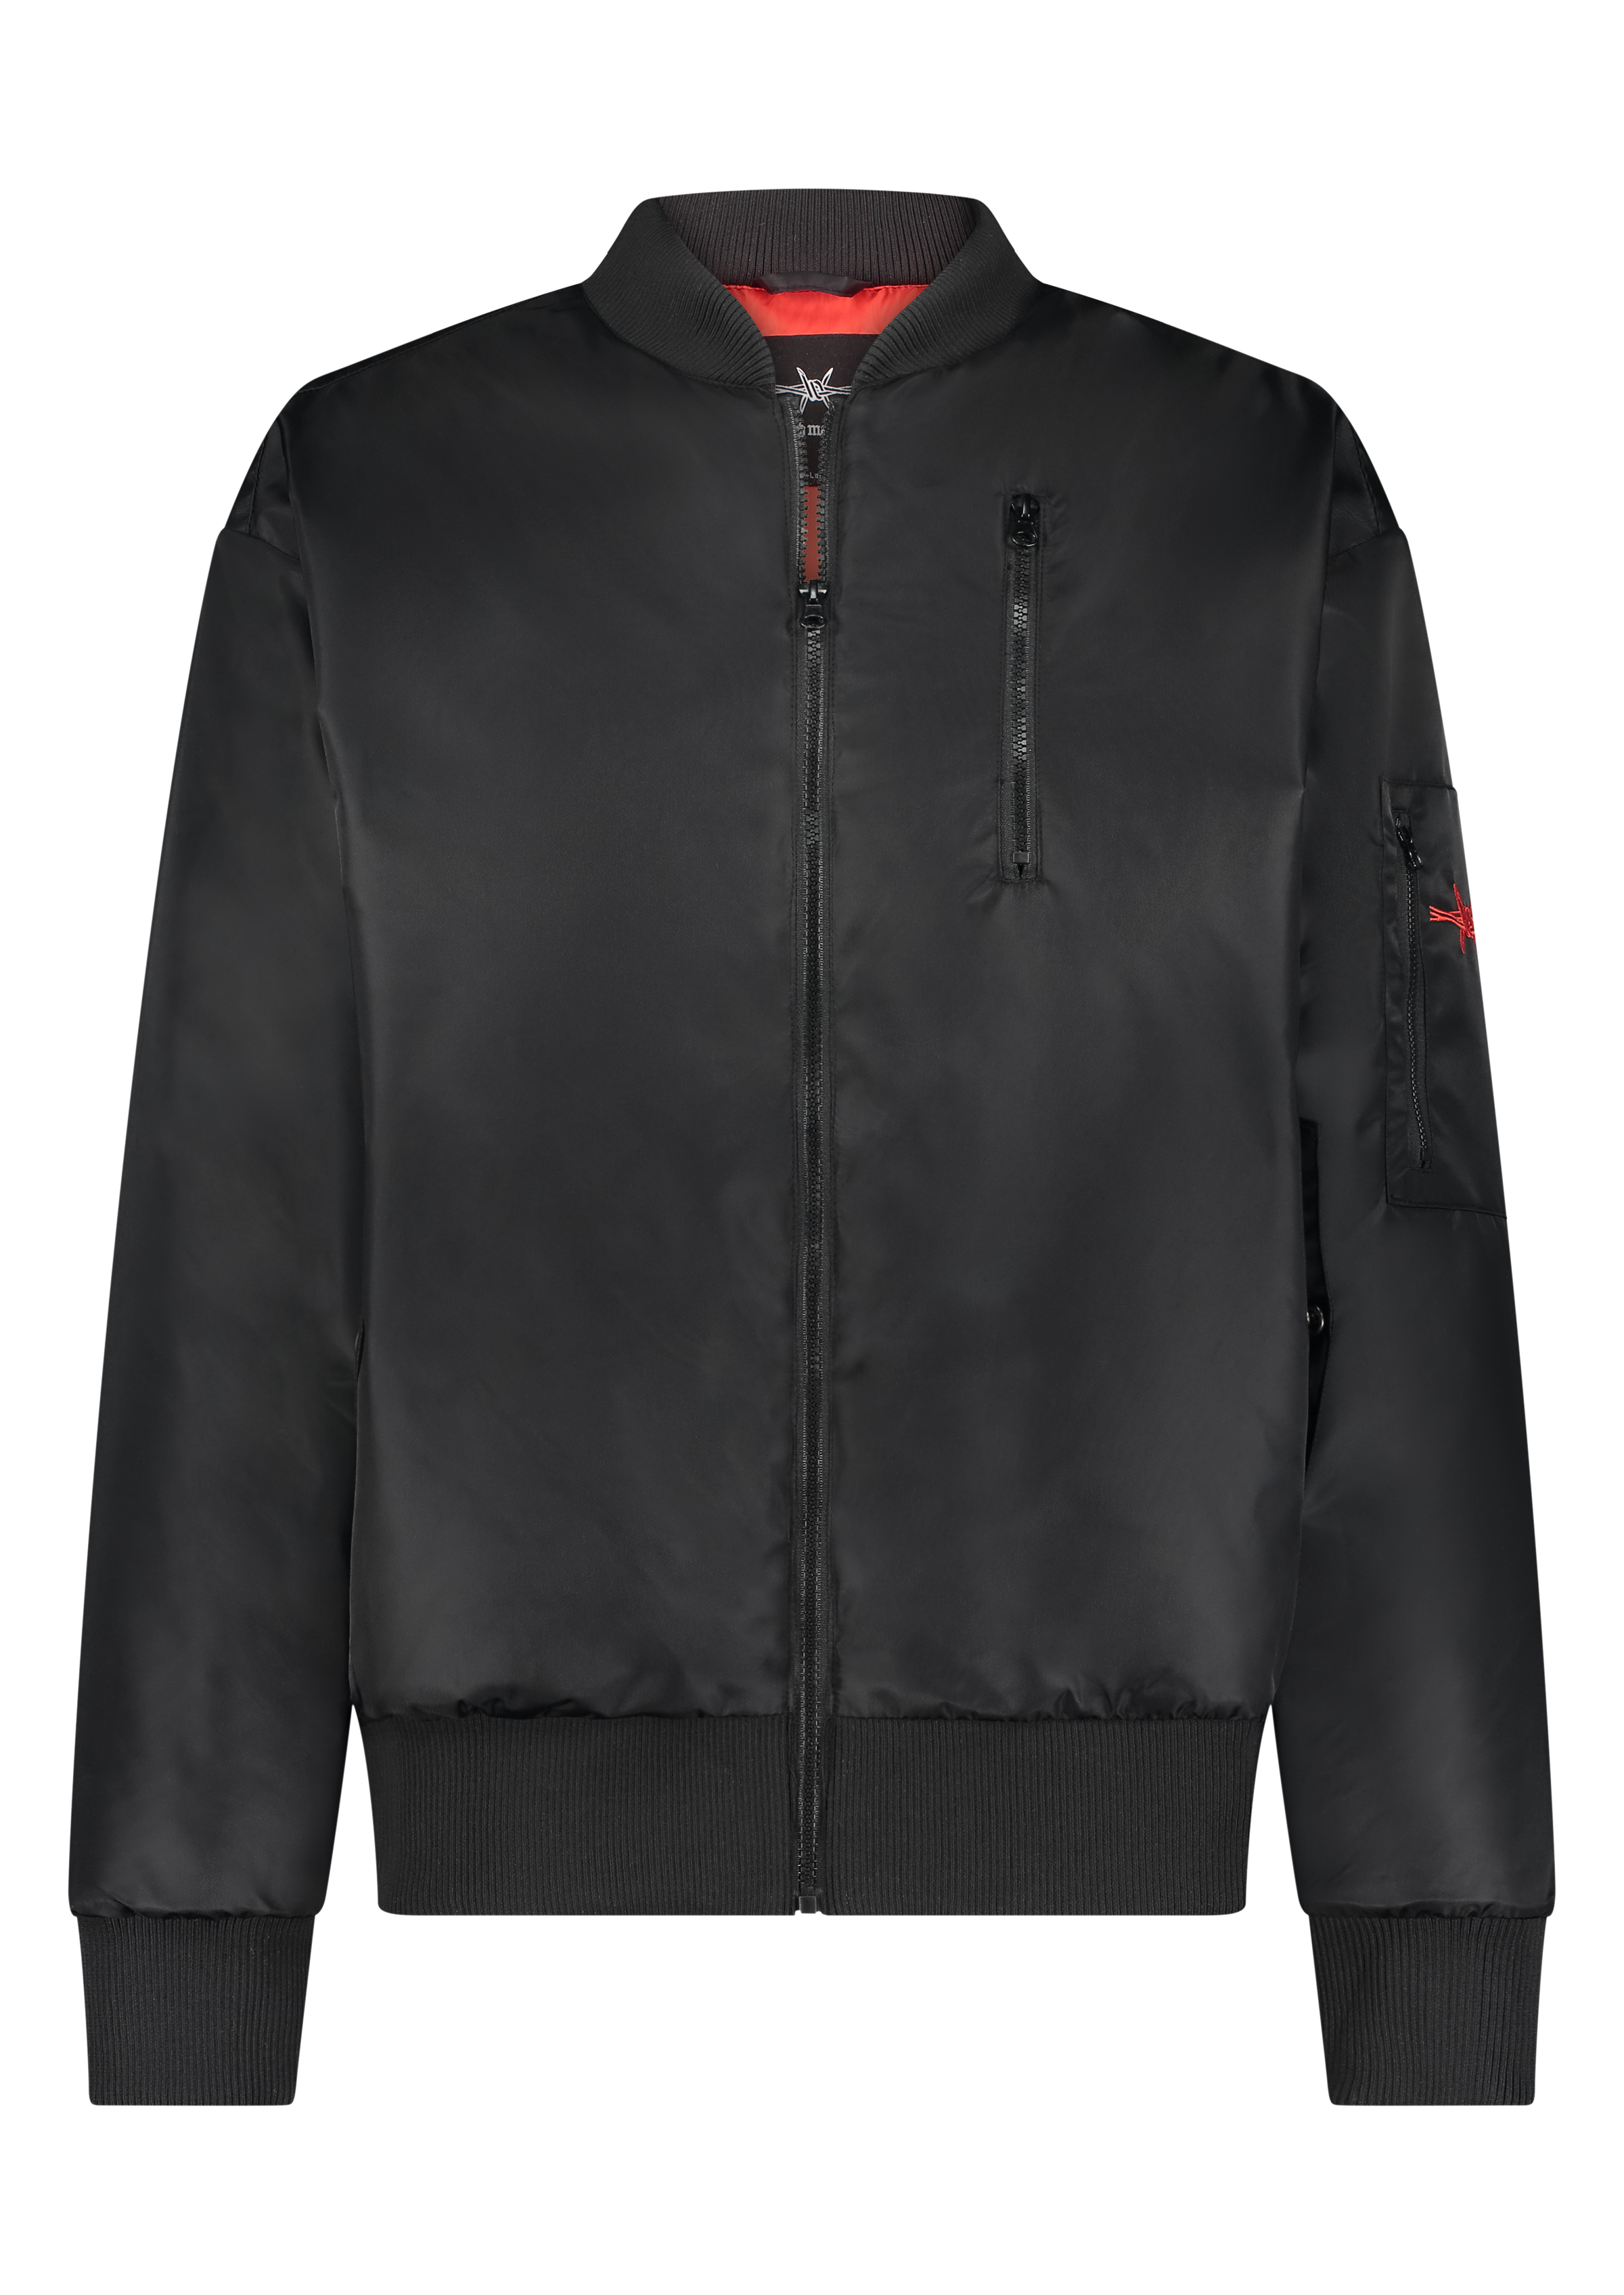 Bomberpe_blackred_front_FRONT.png